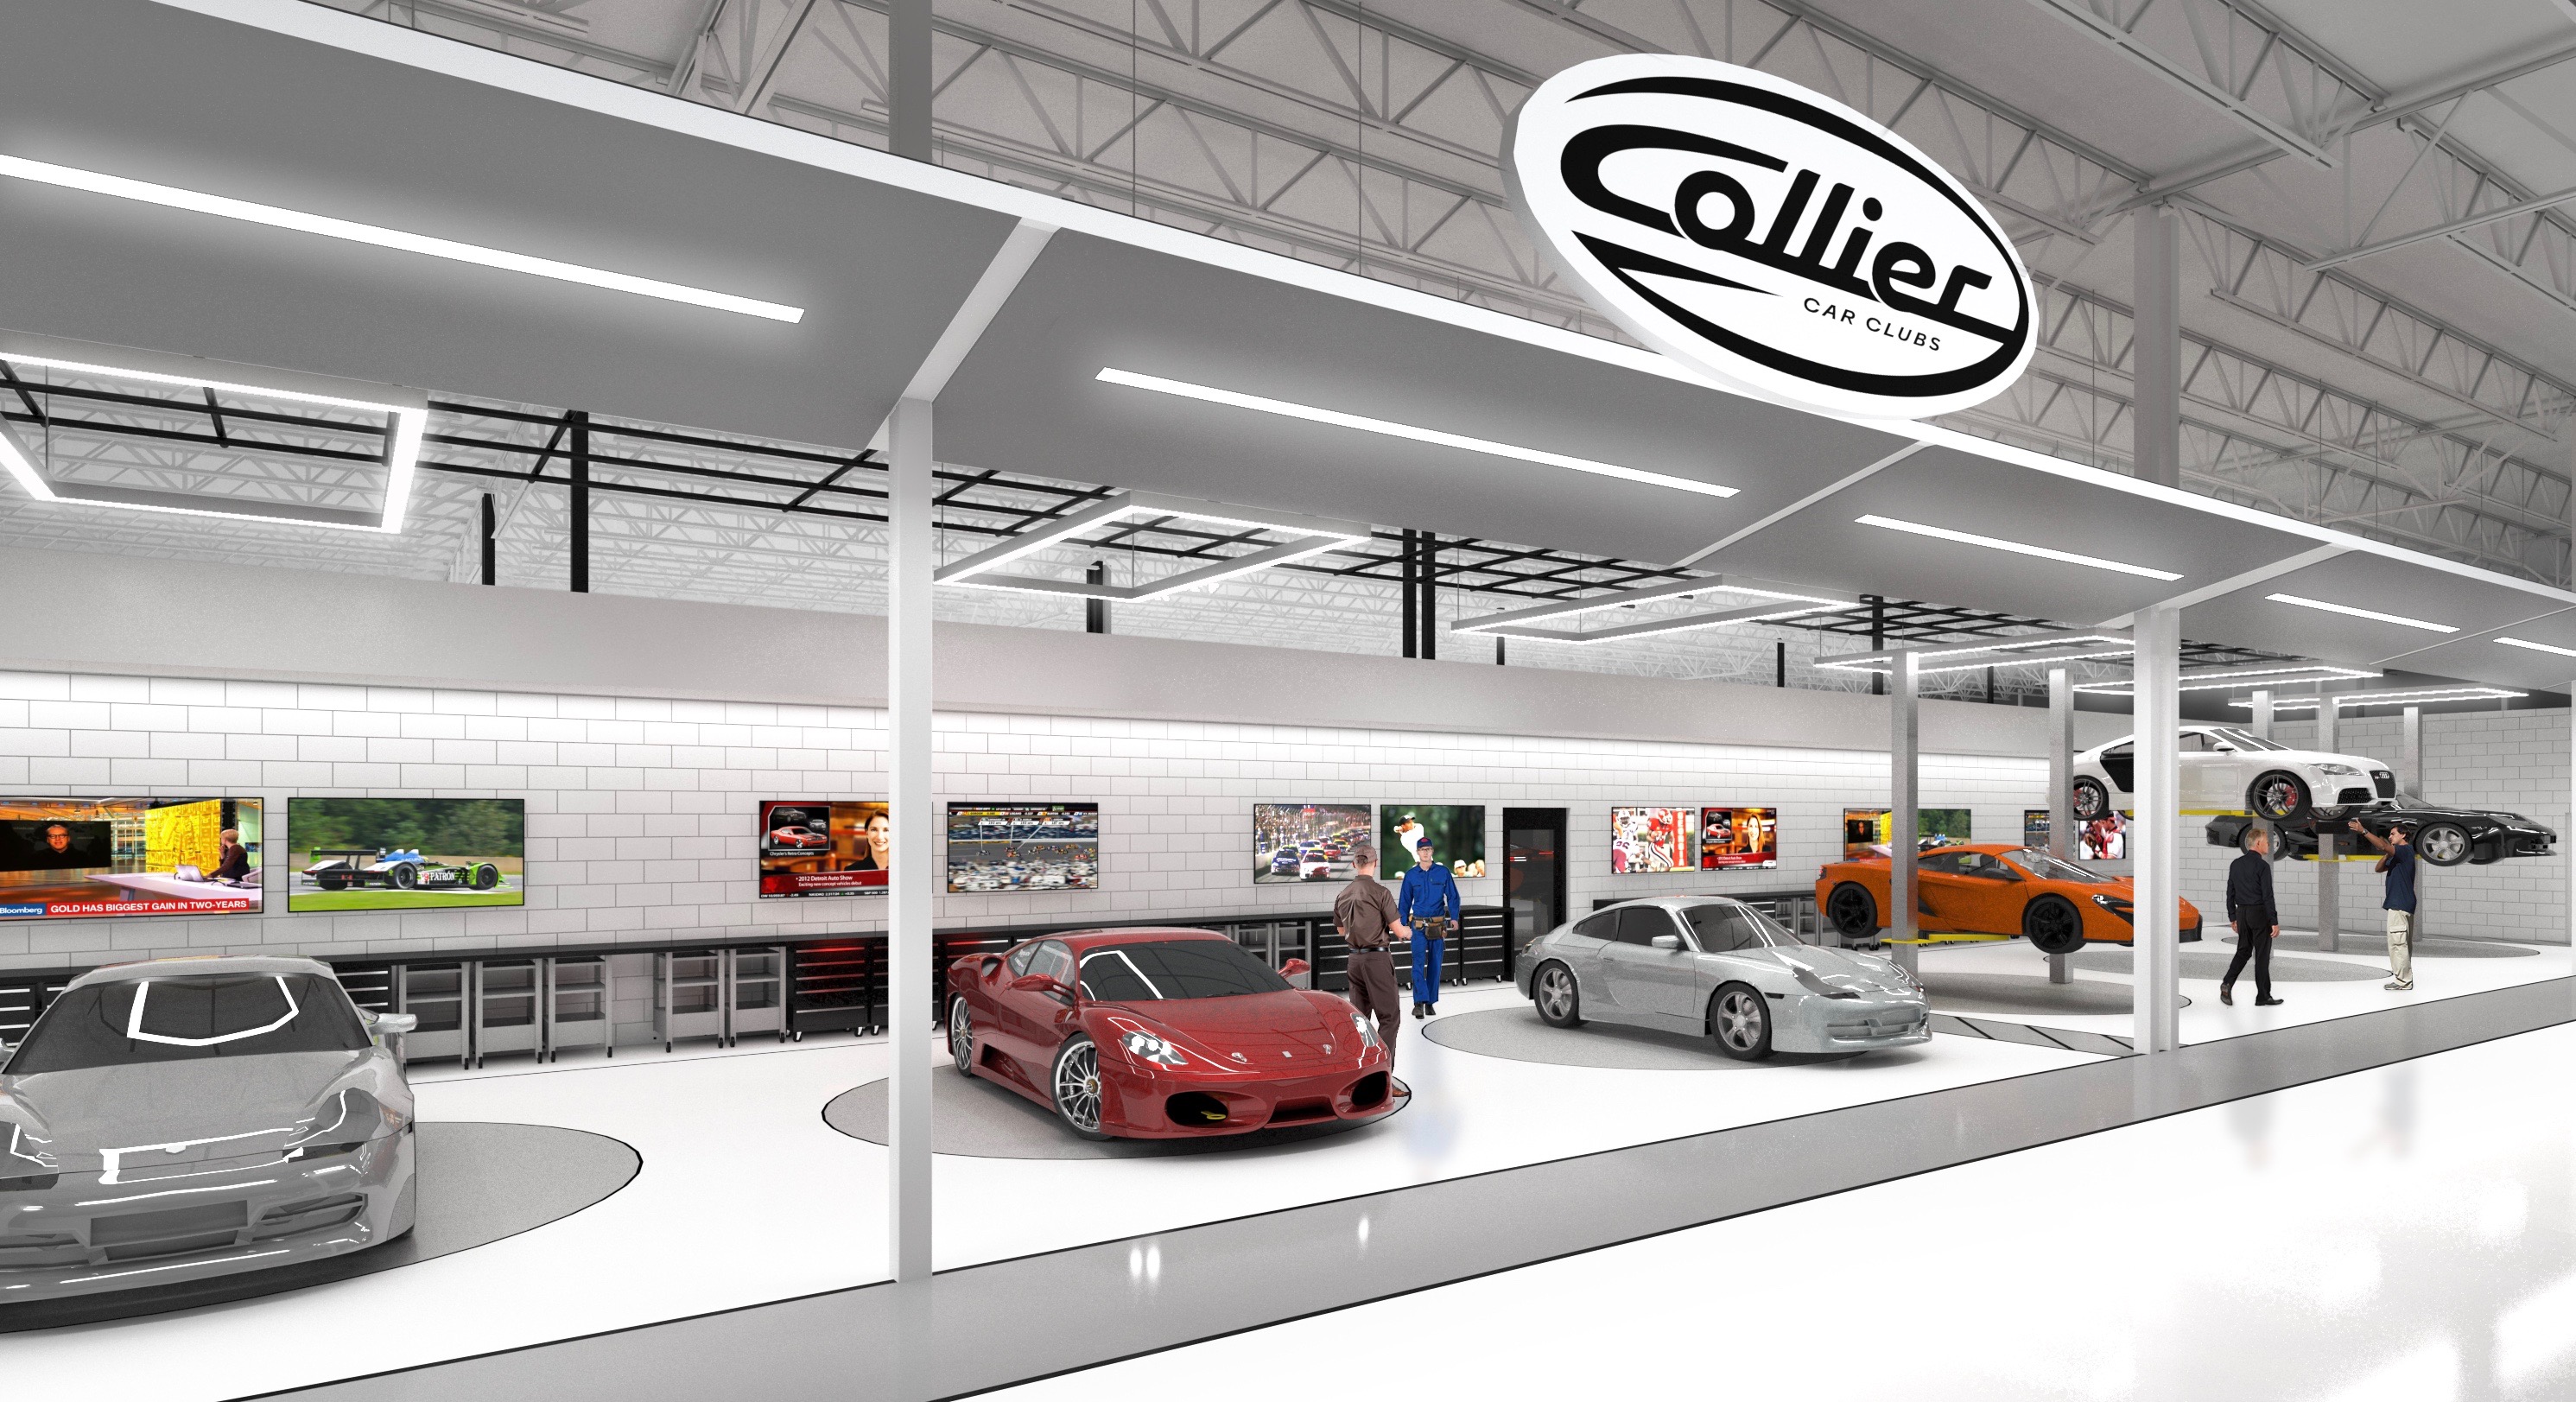 Collier Car Clubs, Collier Car Clubs announce first location, ClassicCars.com Journal